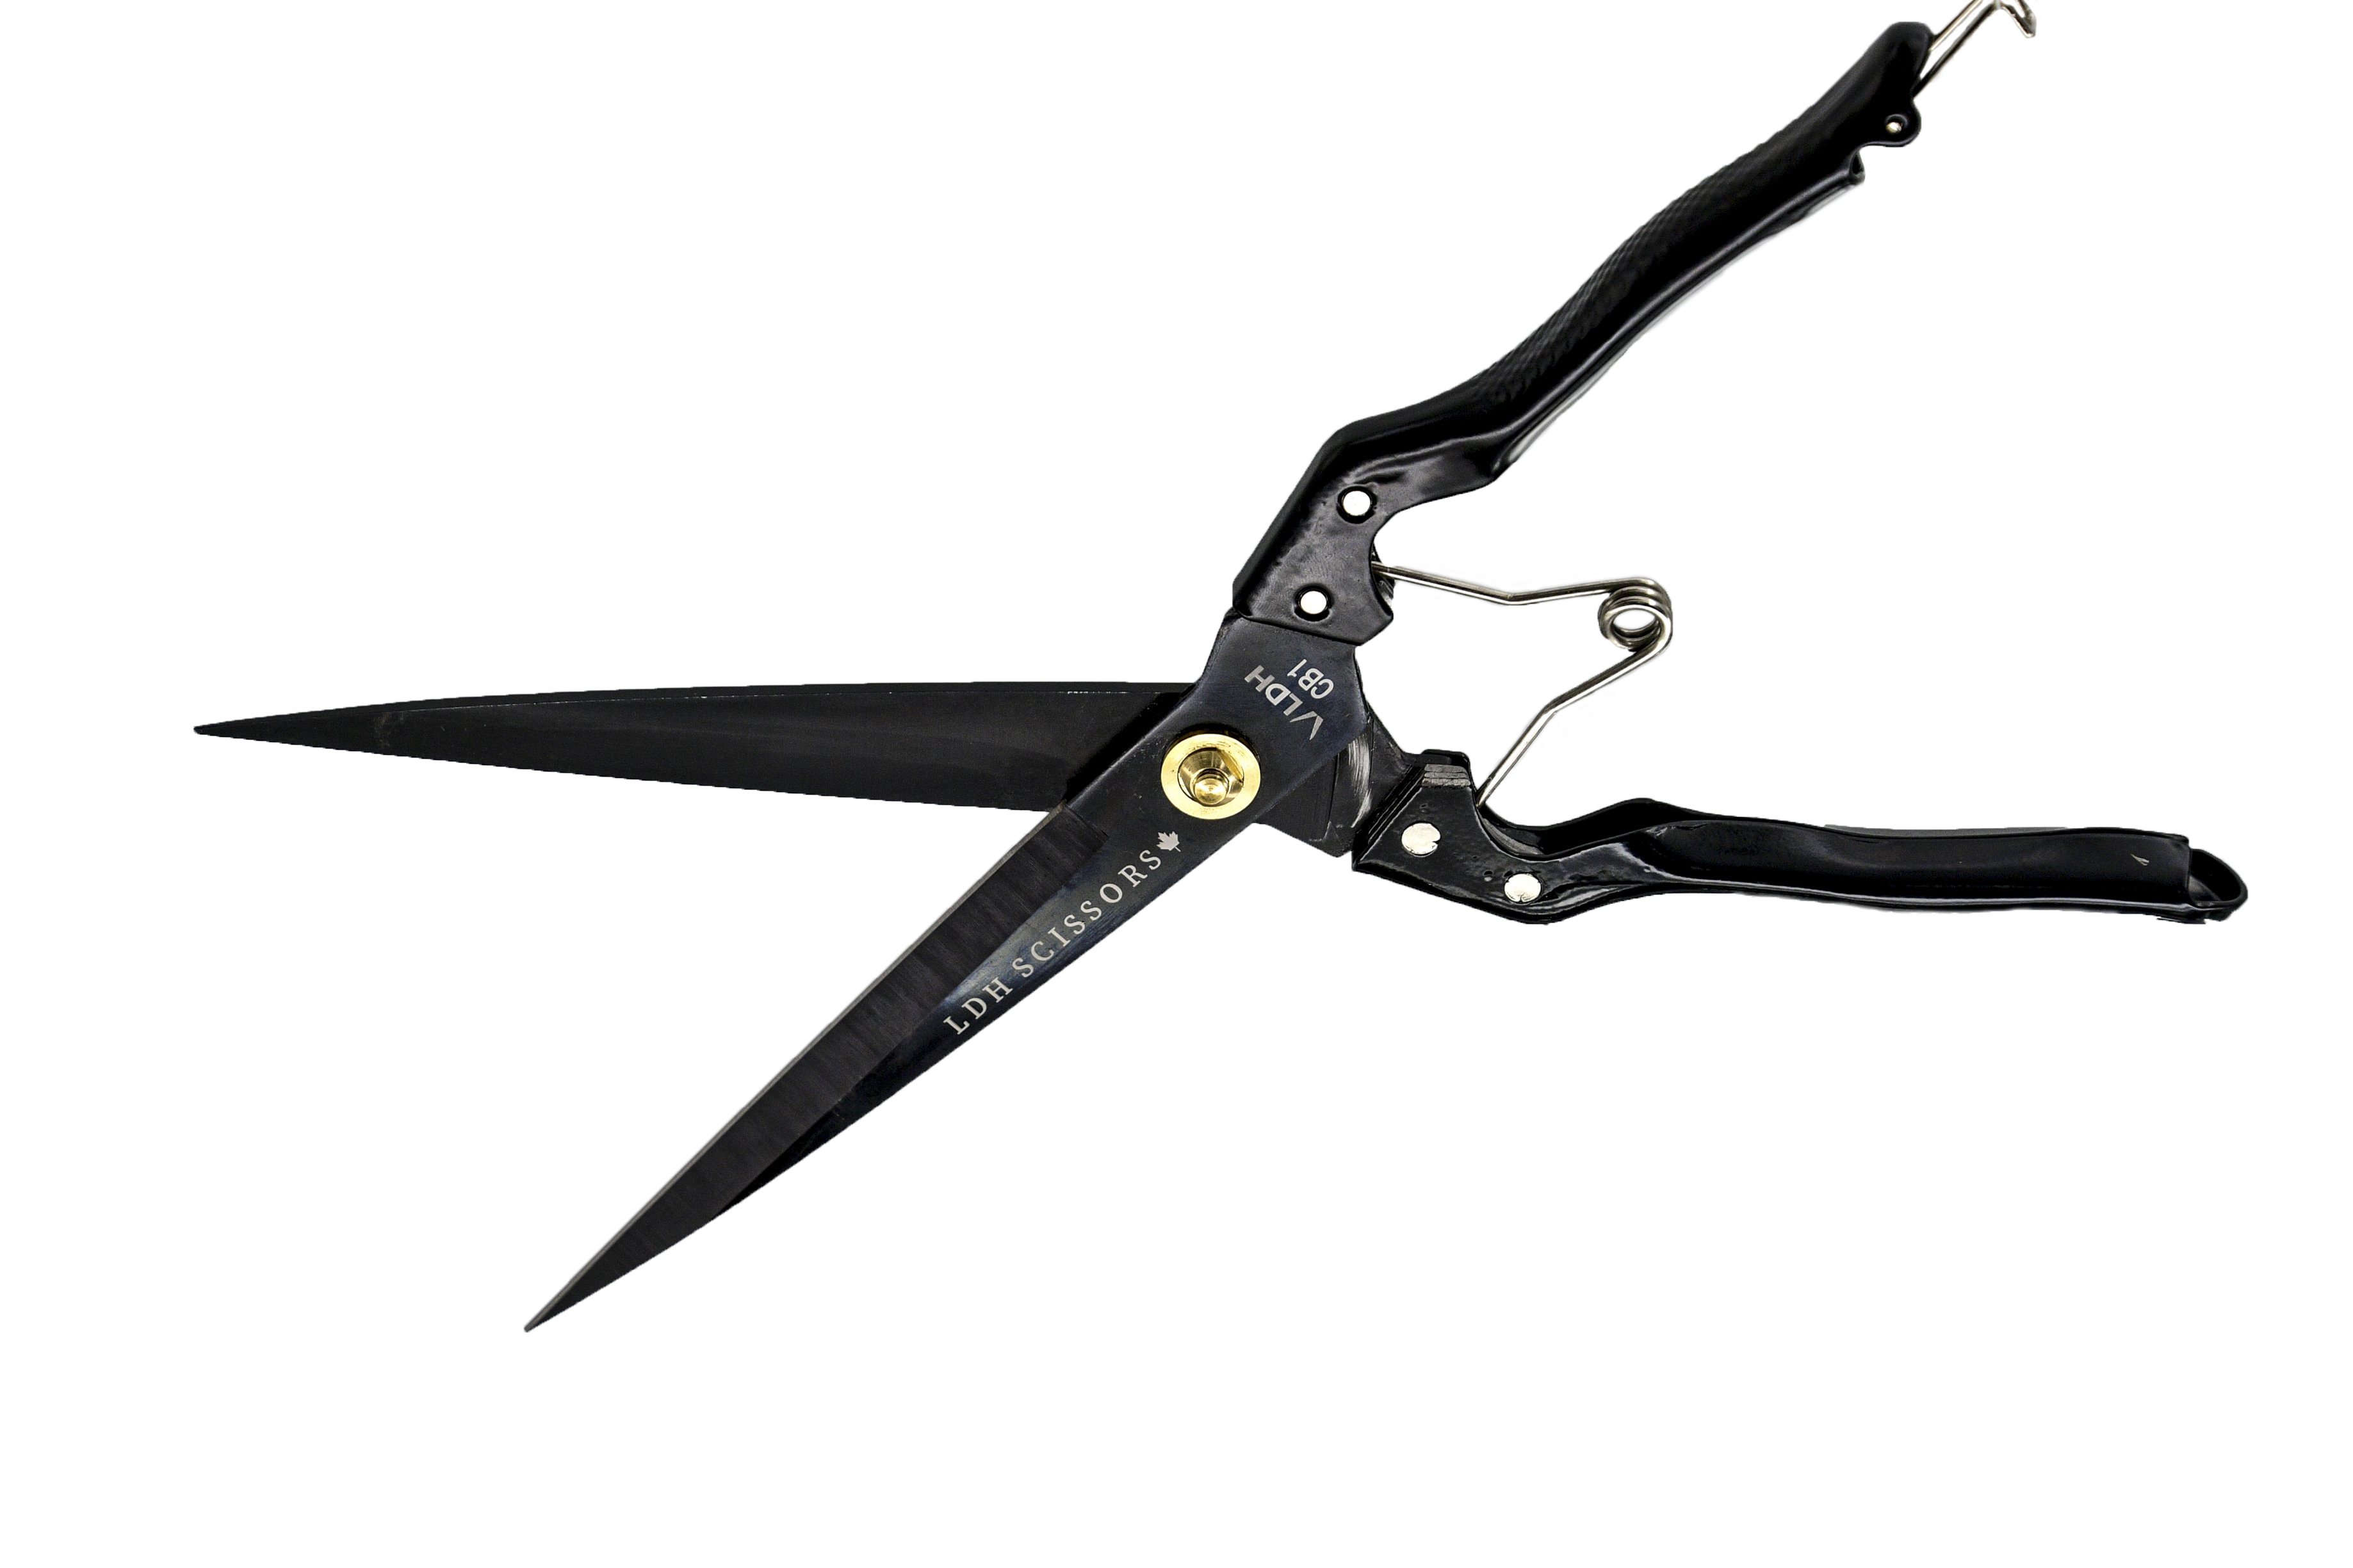 Extra Long shears for cutting batting and long pieces of fabric